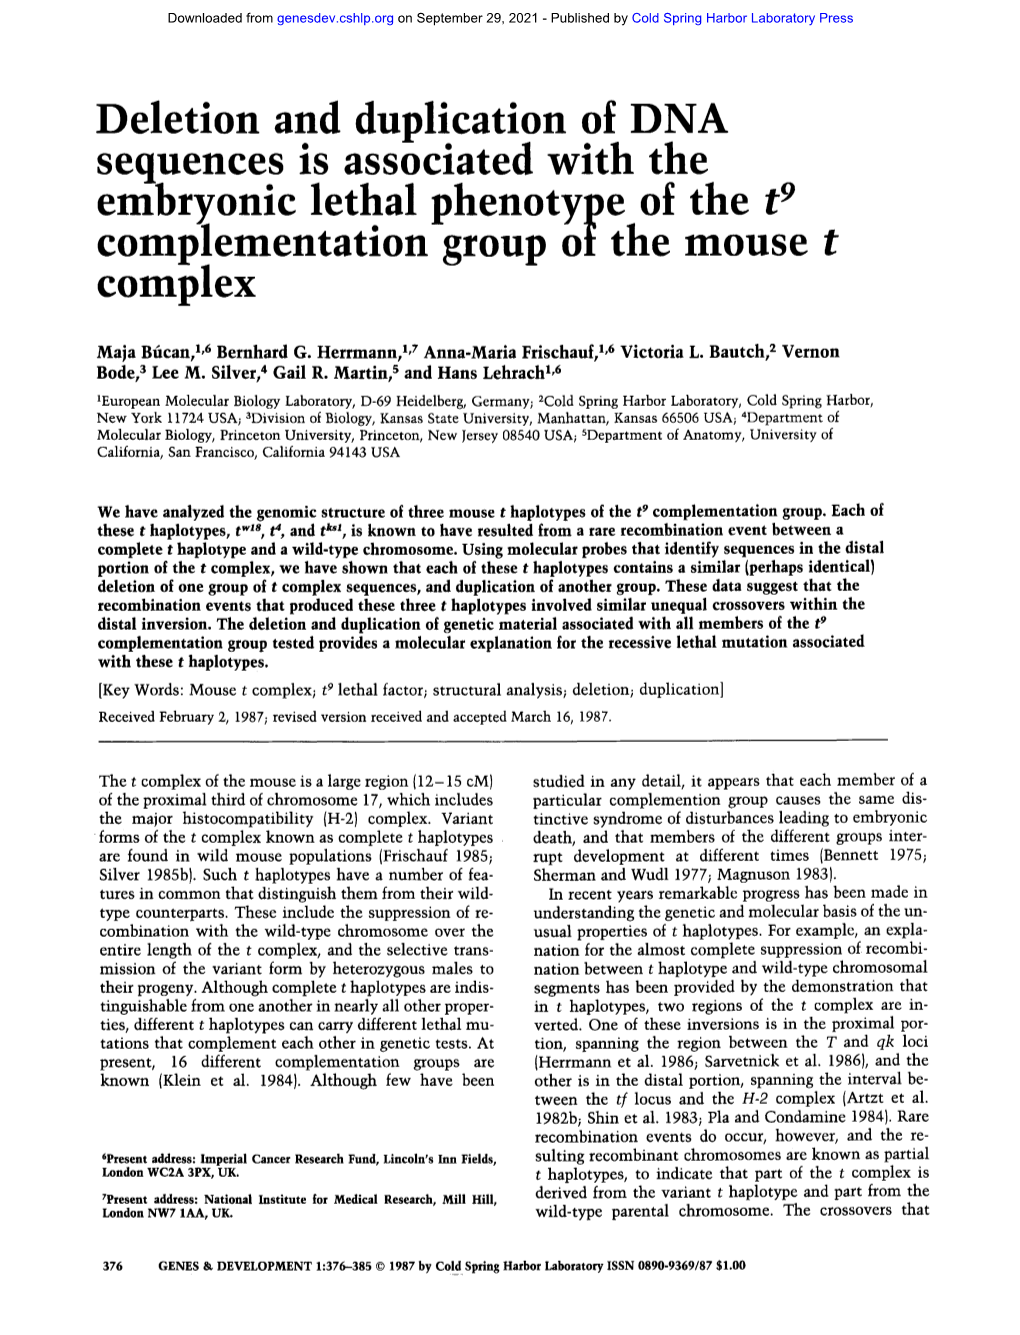 Deletion and Duplication of DNA Sequences Is Associated with the Embryonic Lethal Phenotype of the T 9 Comp!Ementation Group of the Mouse T Complex